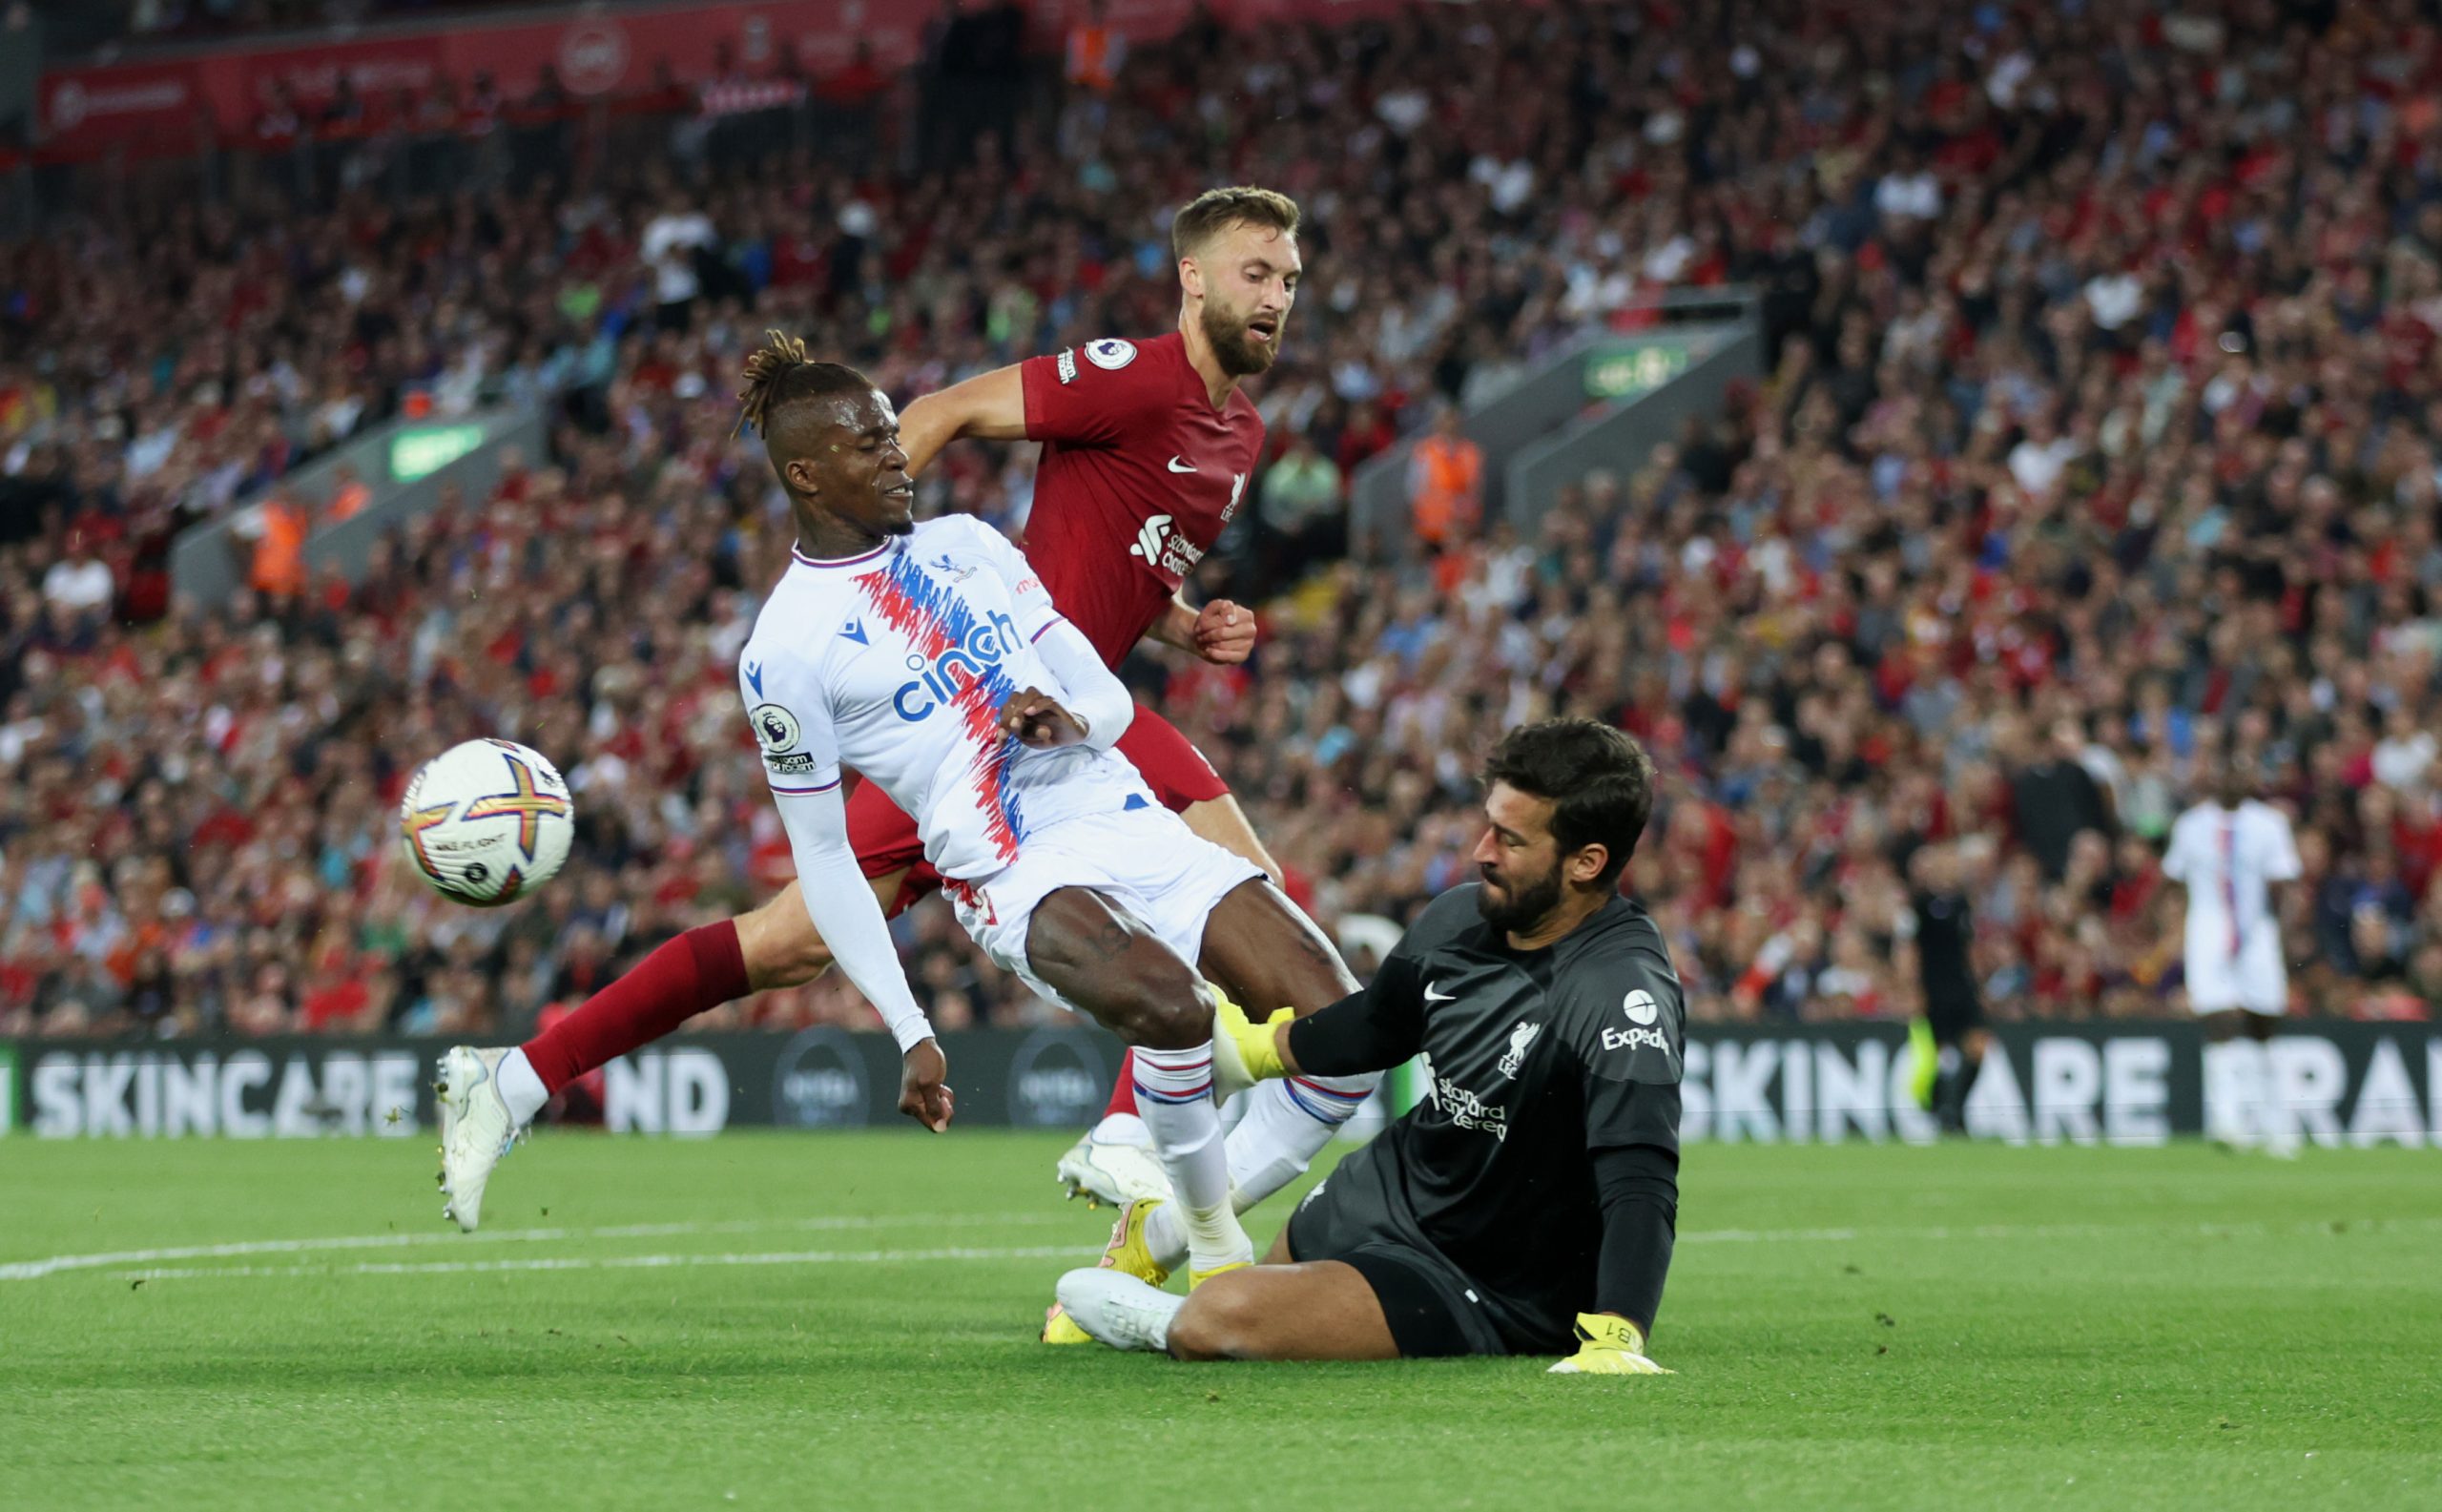 Wilfried Zaha of Crystal Palace has a shot saved by Alisson Becker of Liverpool as Nat Phillips watches on. (Photo by Clive Brunskill/Getty Images)